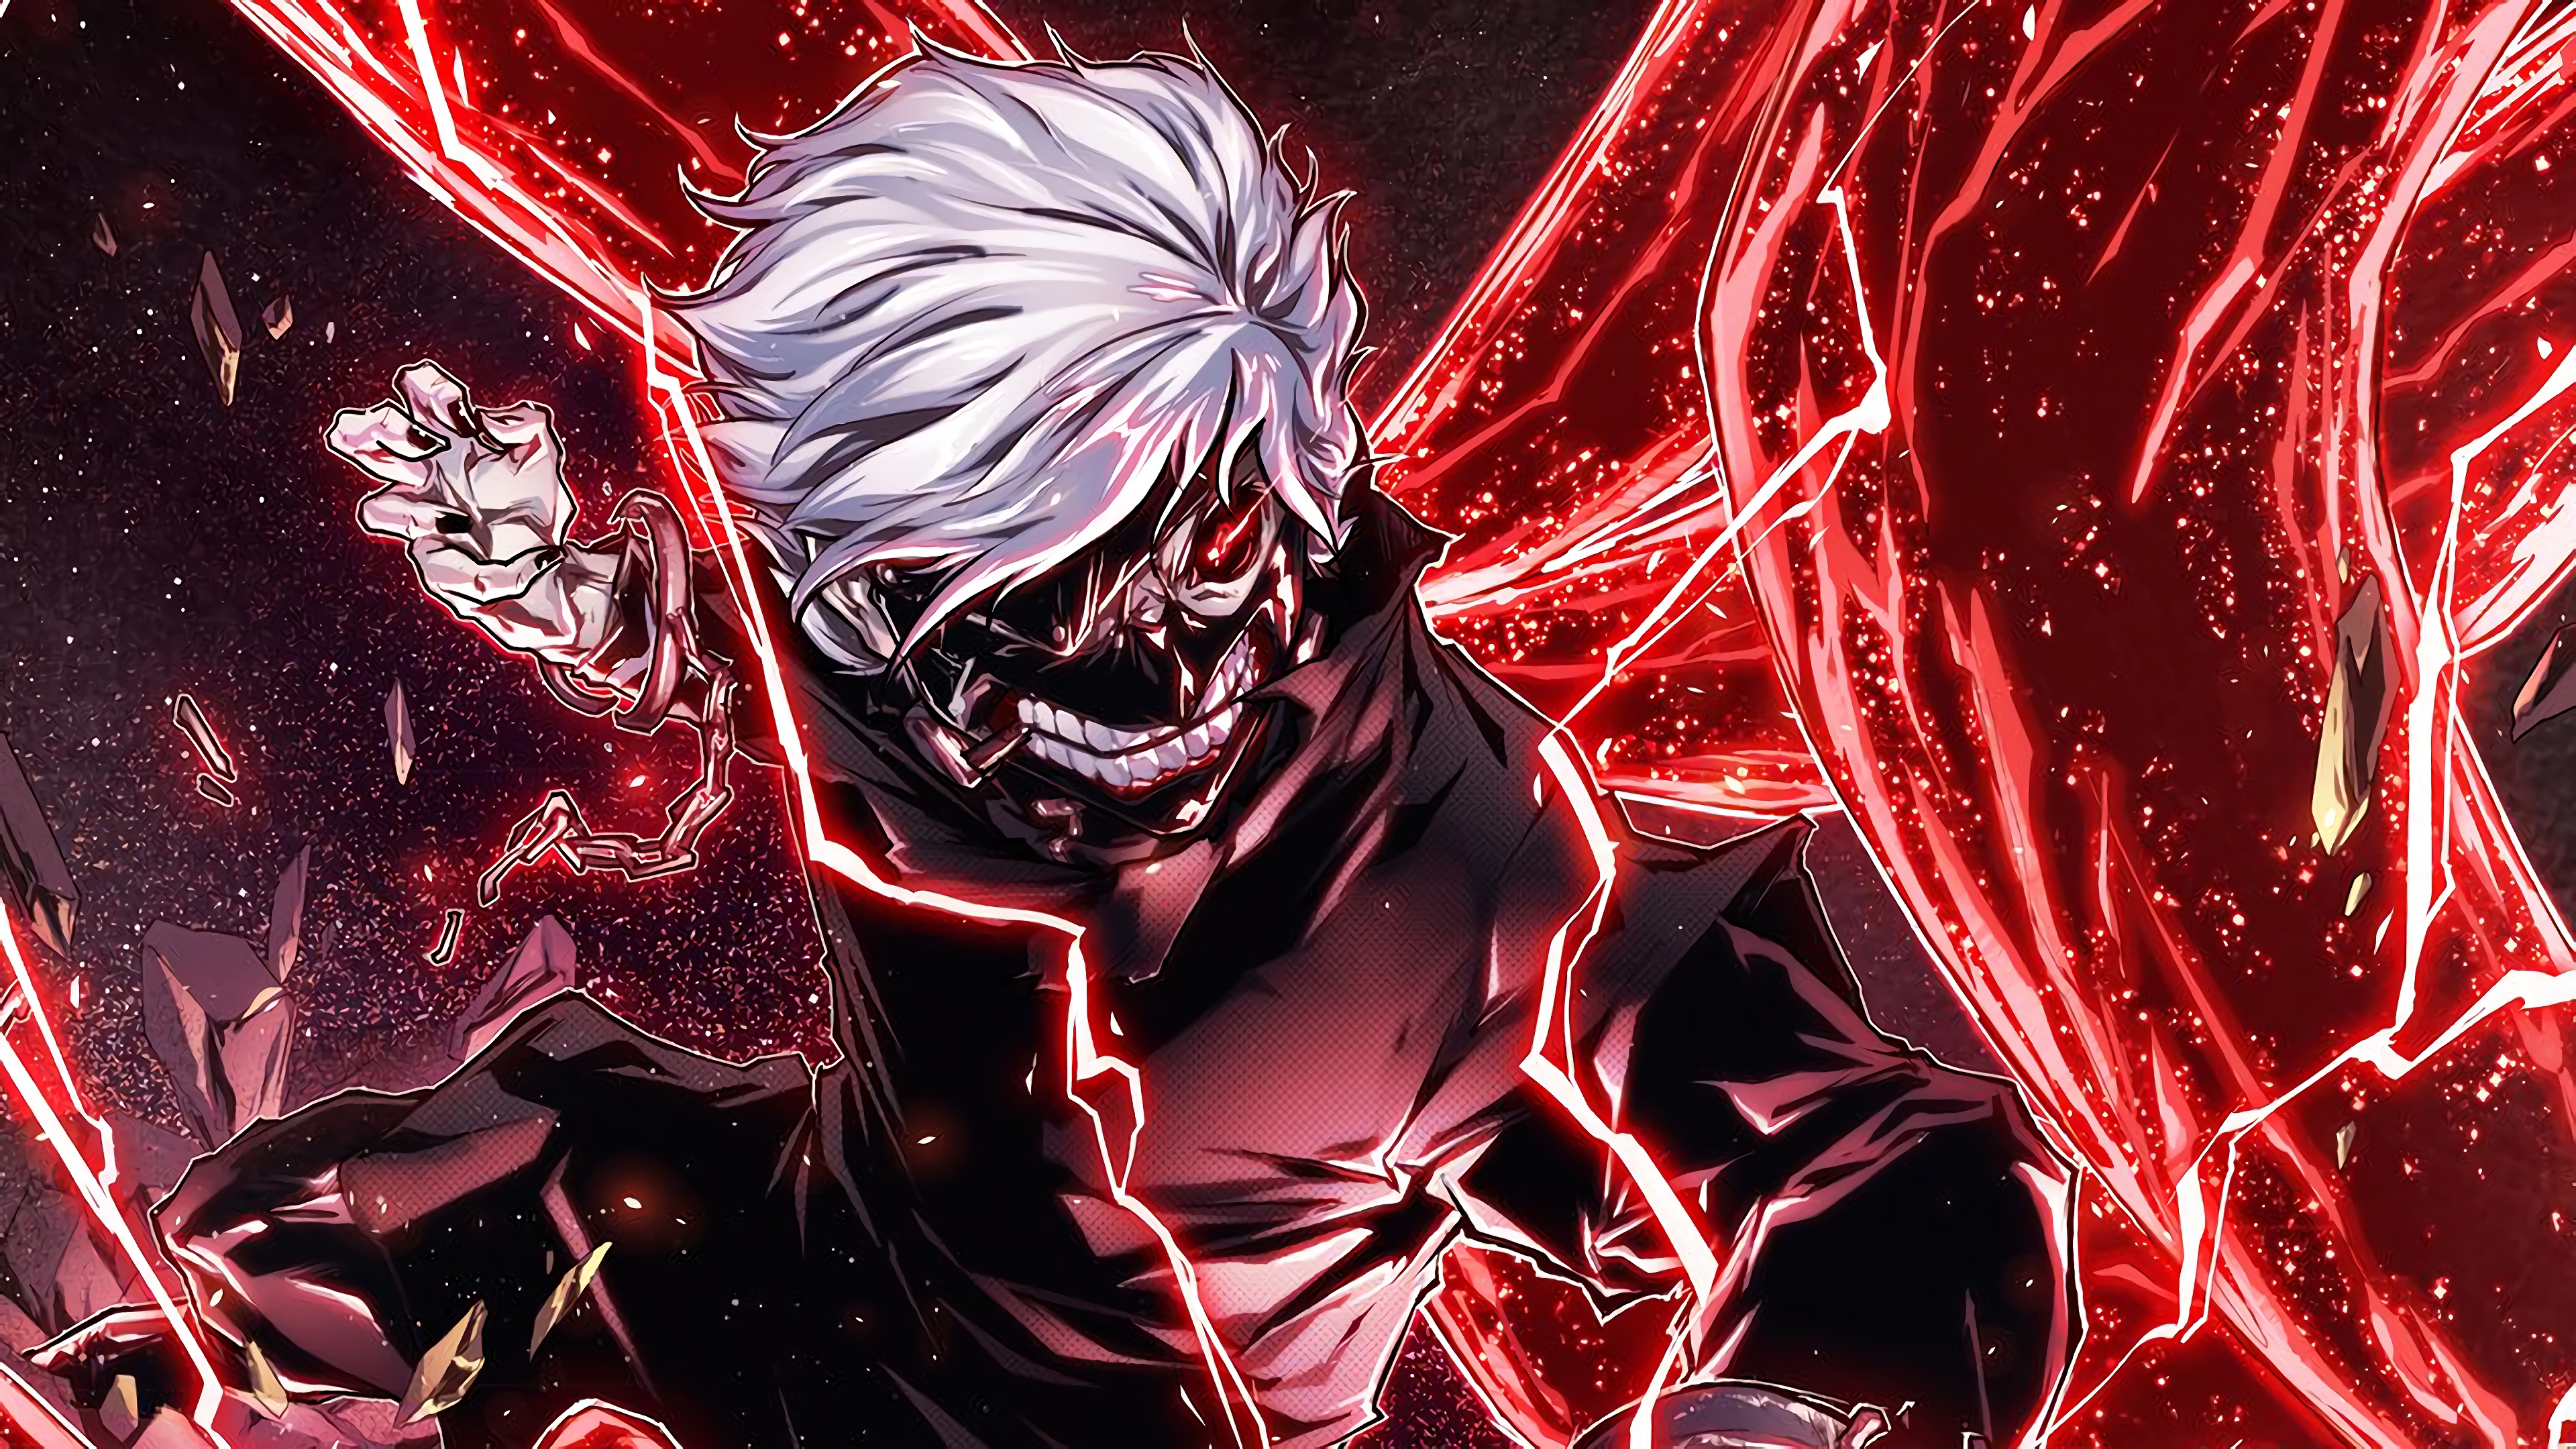 Ken Kaneki Tokyo Ghoul, HD Anime, 4k Wallpapers, Images, Backgrounds,
Photos and Pictures